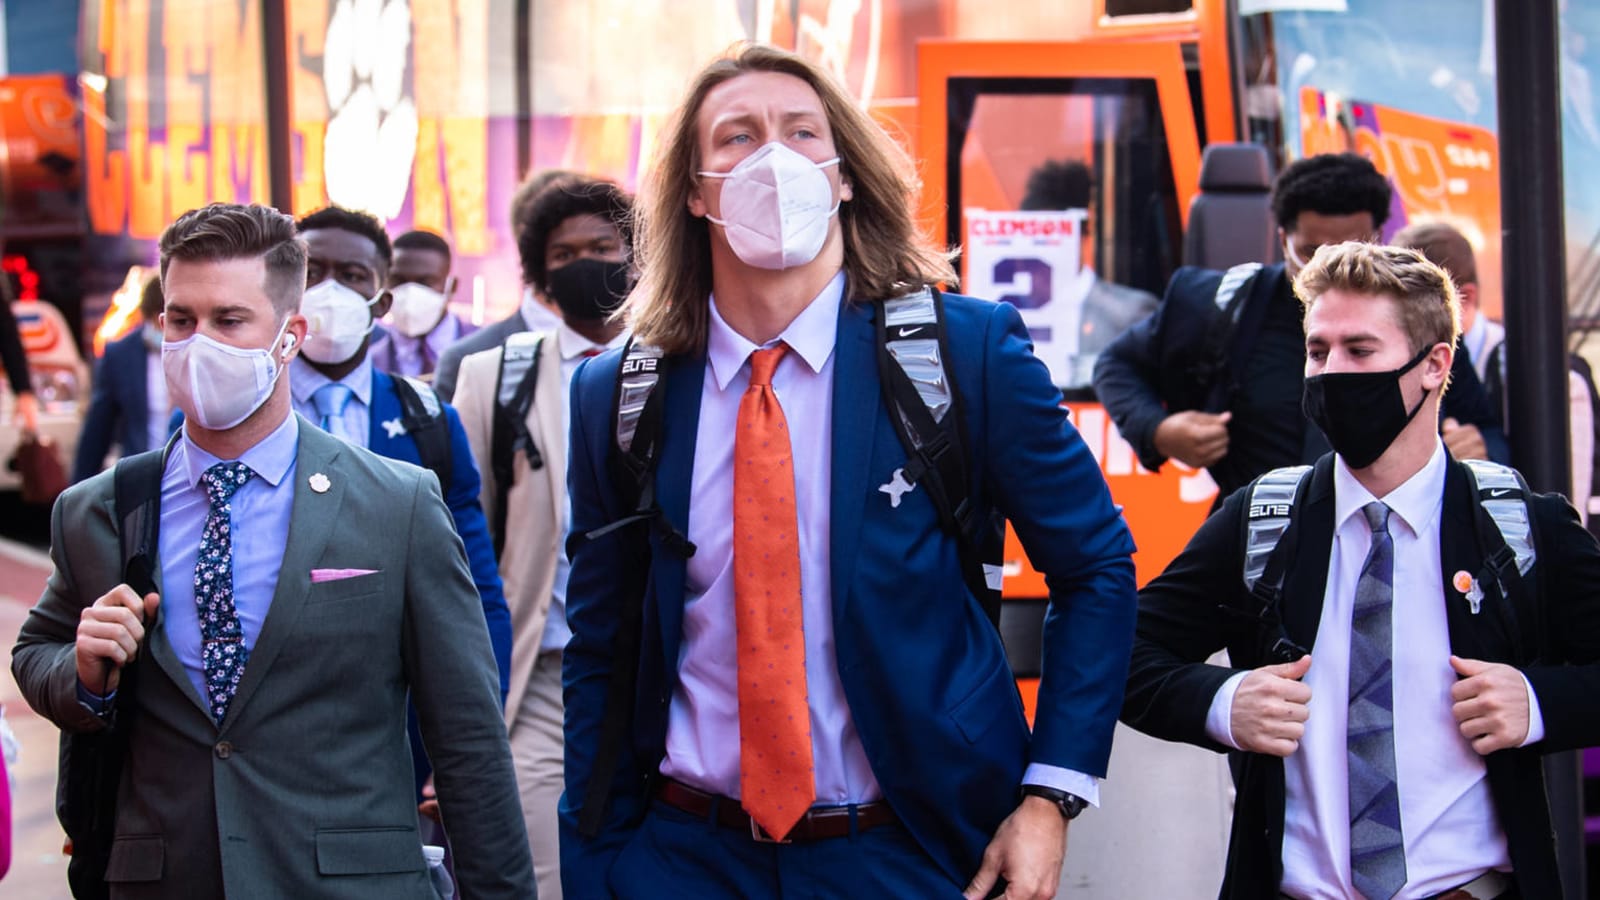 Trevor Lawrence traveling with Clemson to Notre Dame